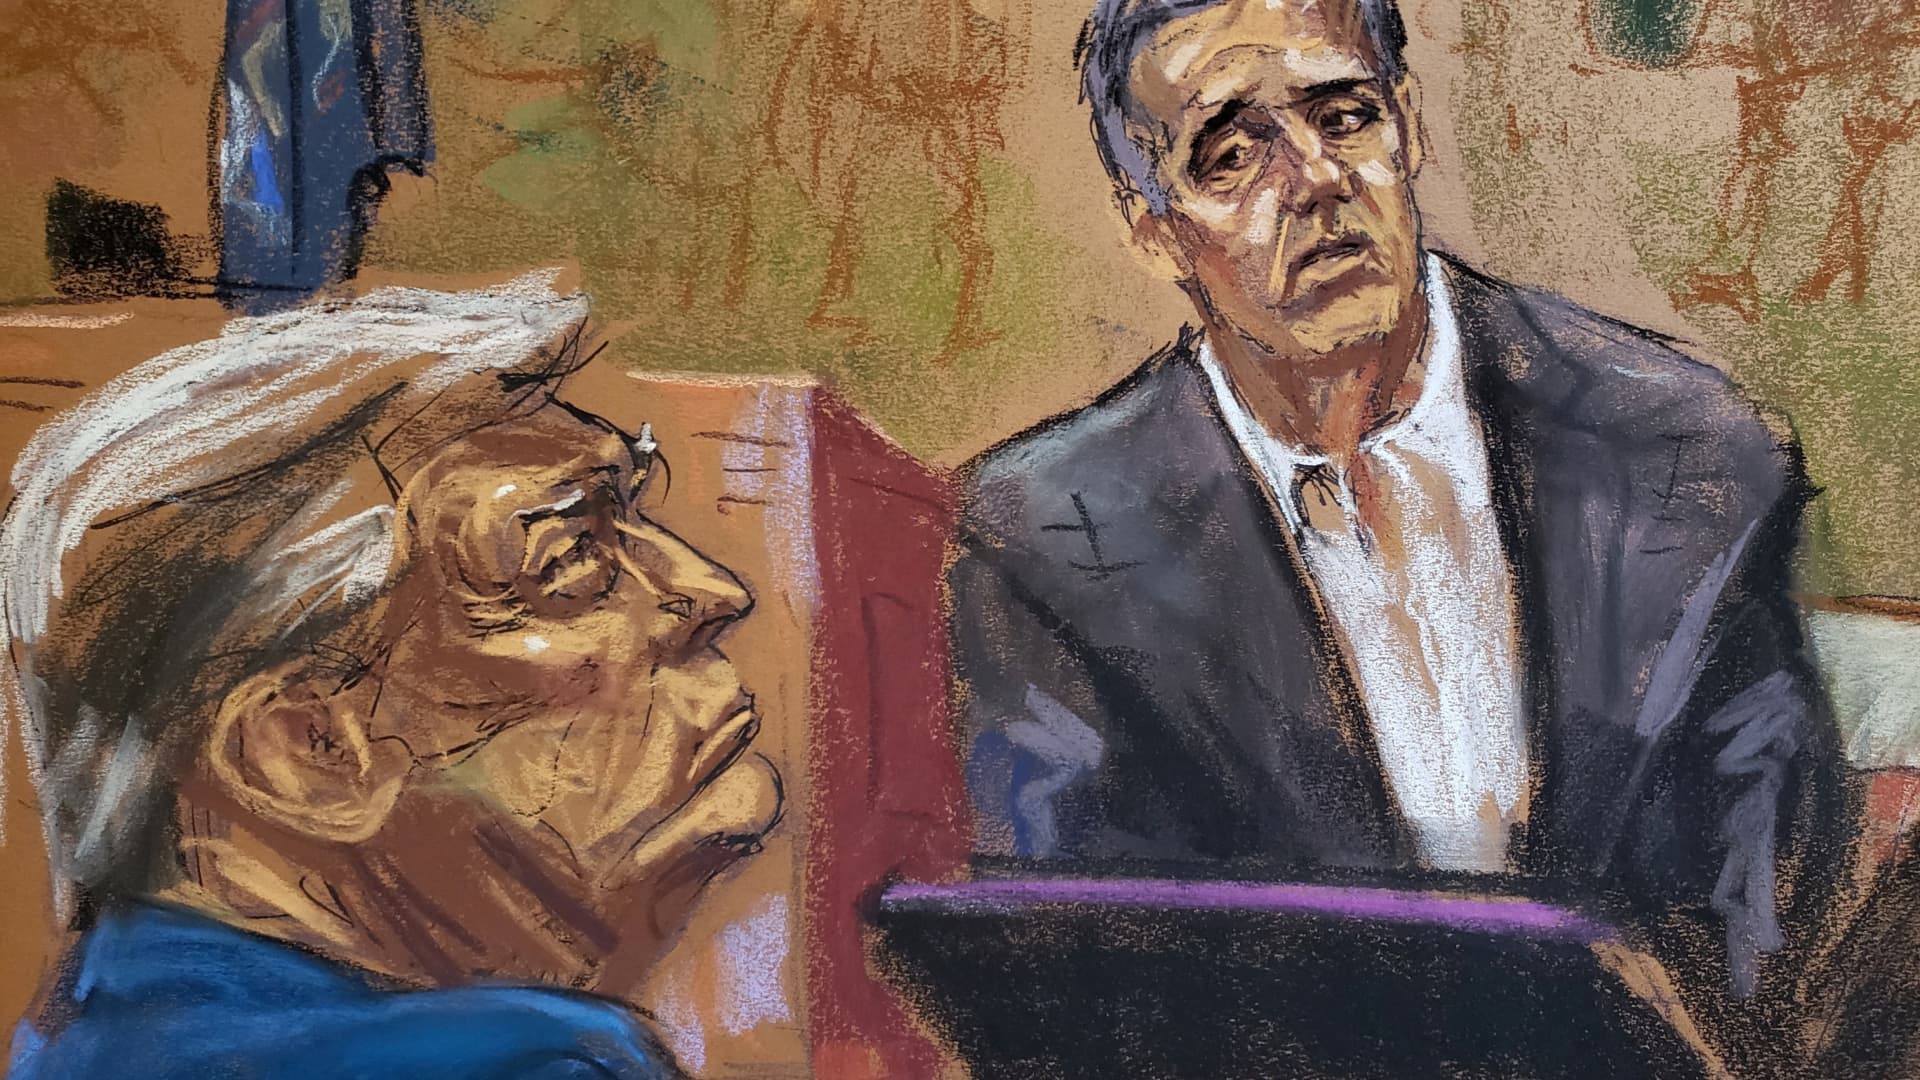 Michael Cohen looks towards former U.S. President Donald Trump as he is questioned by a lawyer for the attorney general's office, during the Trump Organization civil fraud trial in New York State Supreme Court in the Manhattan borough of New York City, October 24, 2023 in this courtroom sketch.